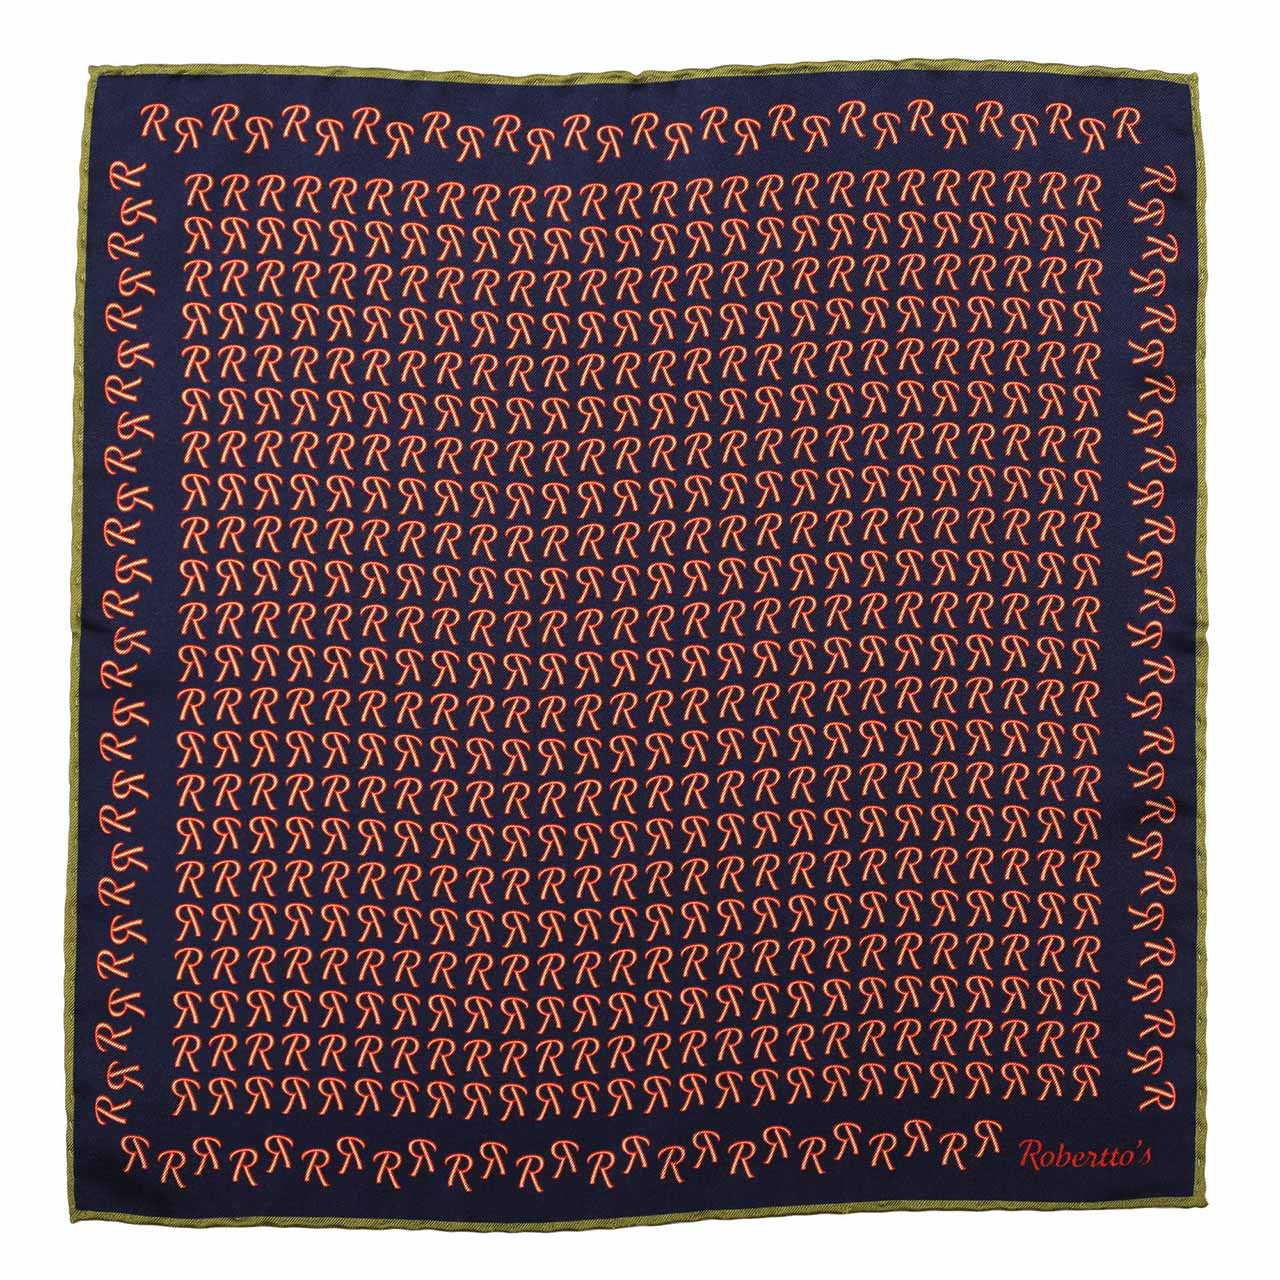 The Monogram Edition Prussian Red Pocket Square